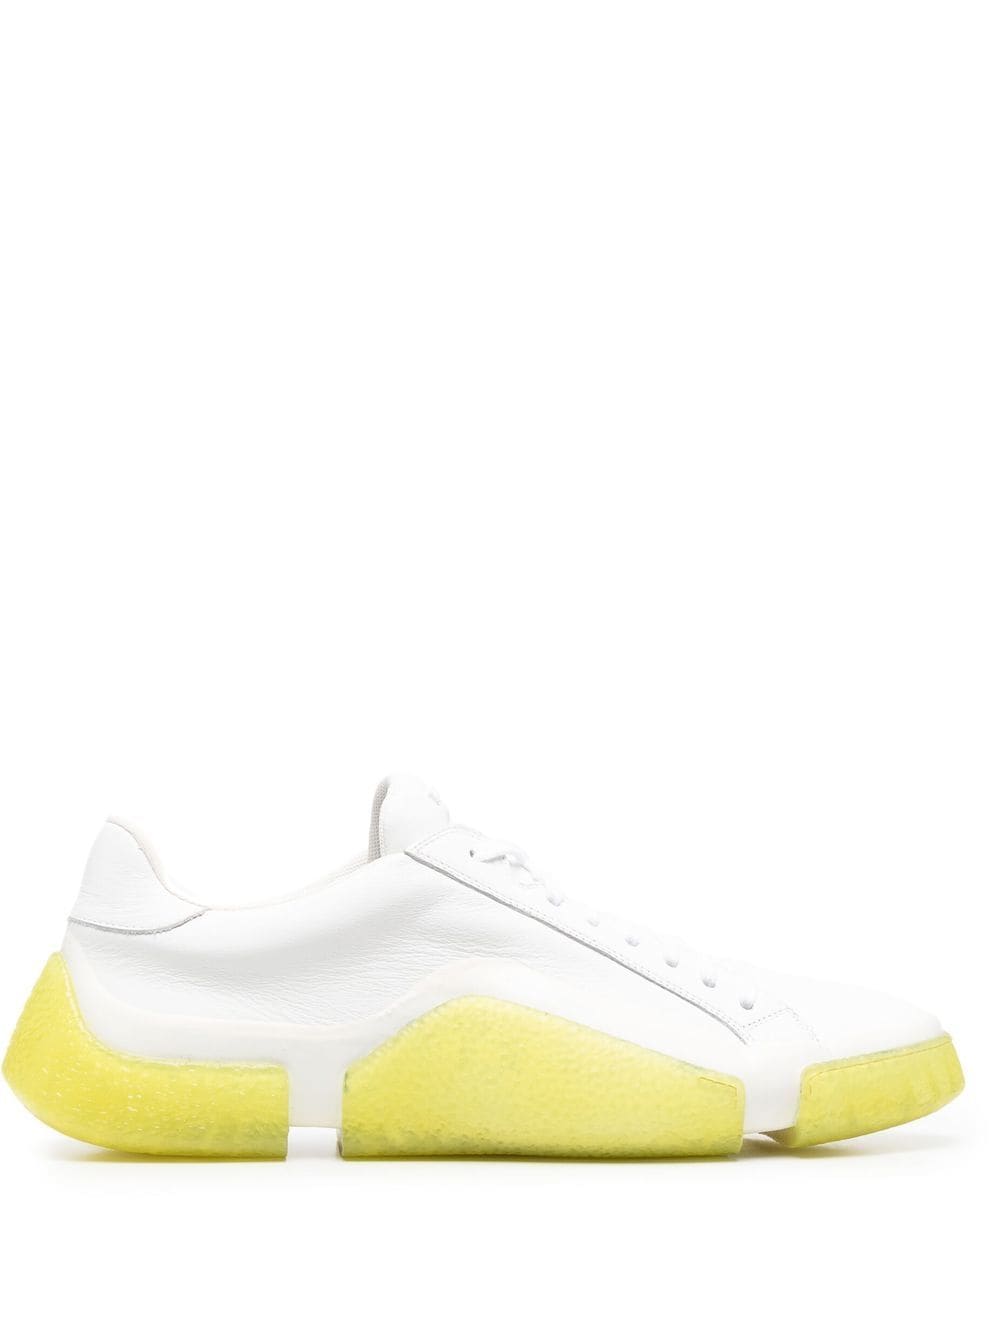 RBRSL RUBBER SOUL low-top lace-up Trainers - Farfetch